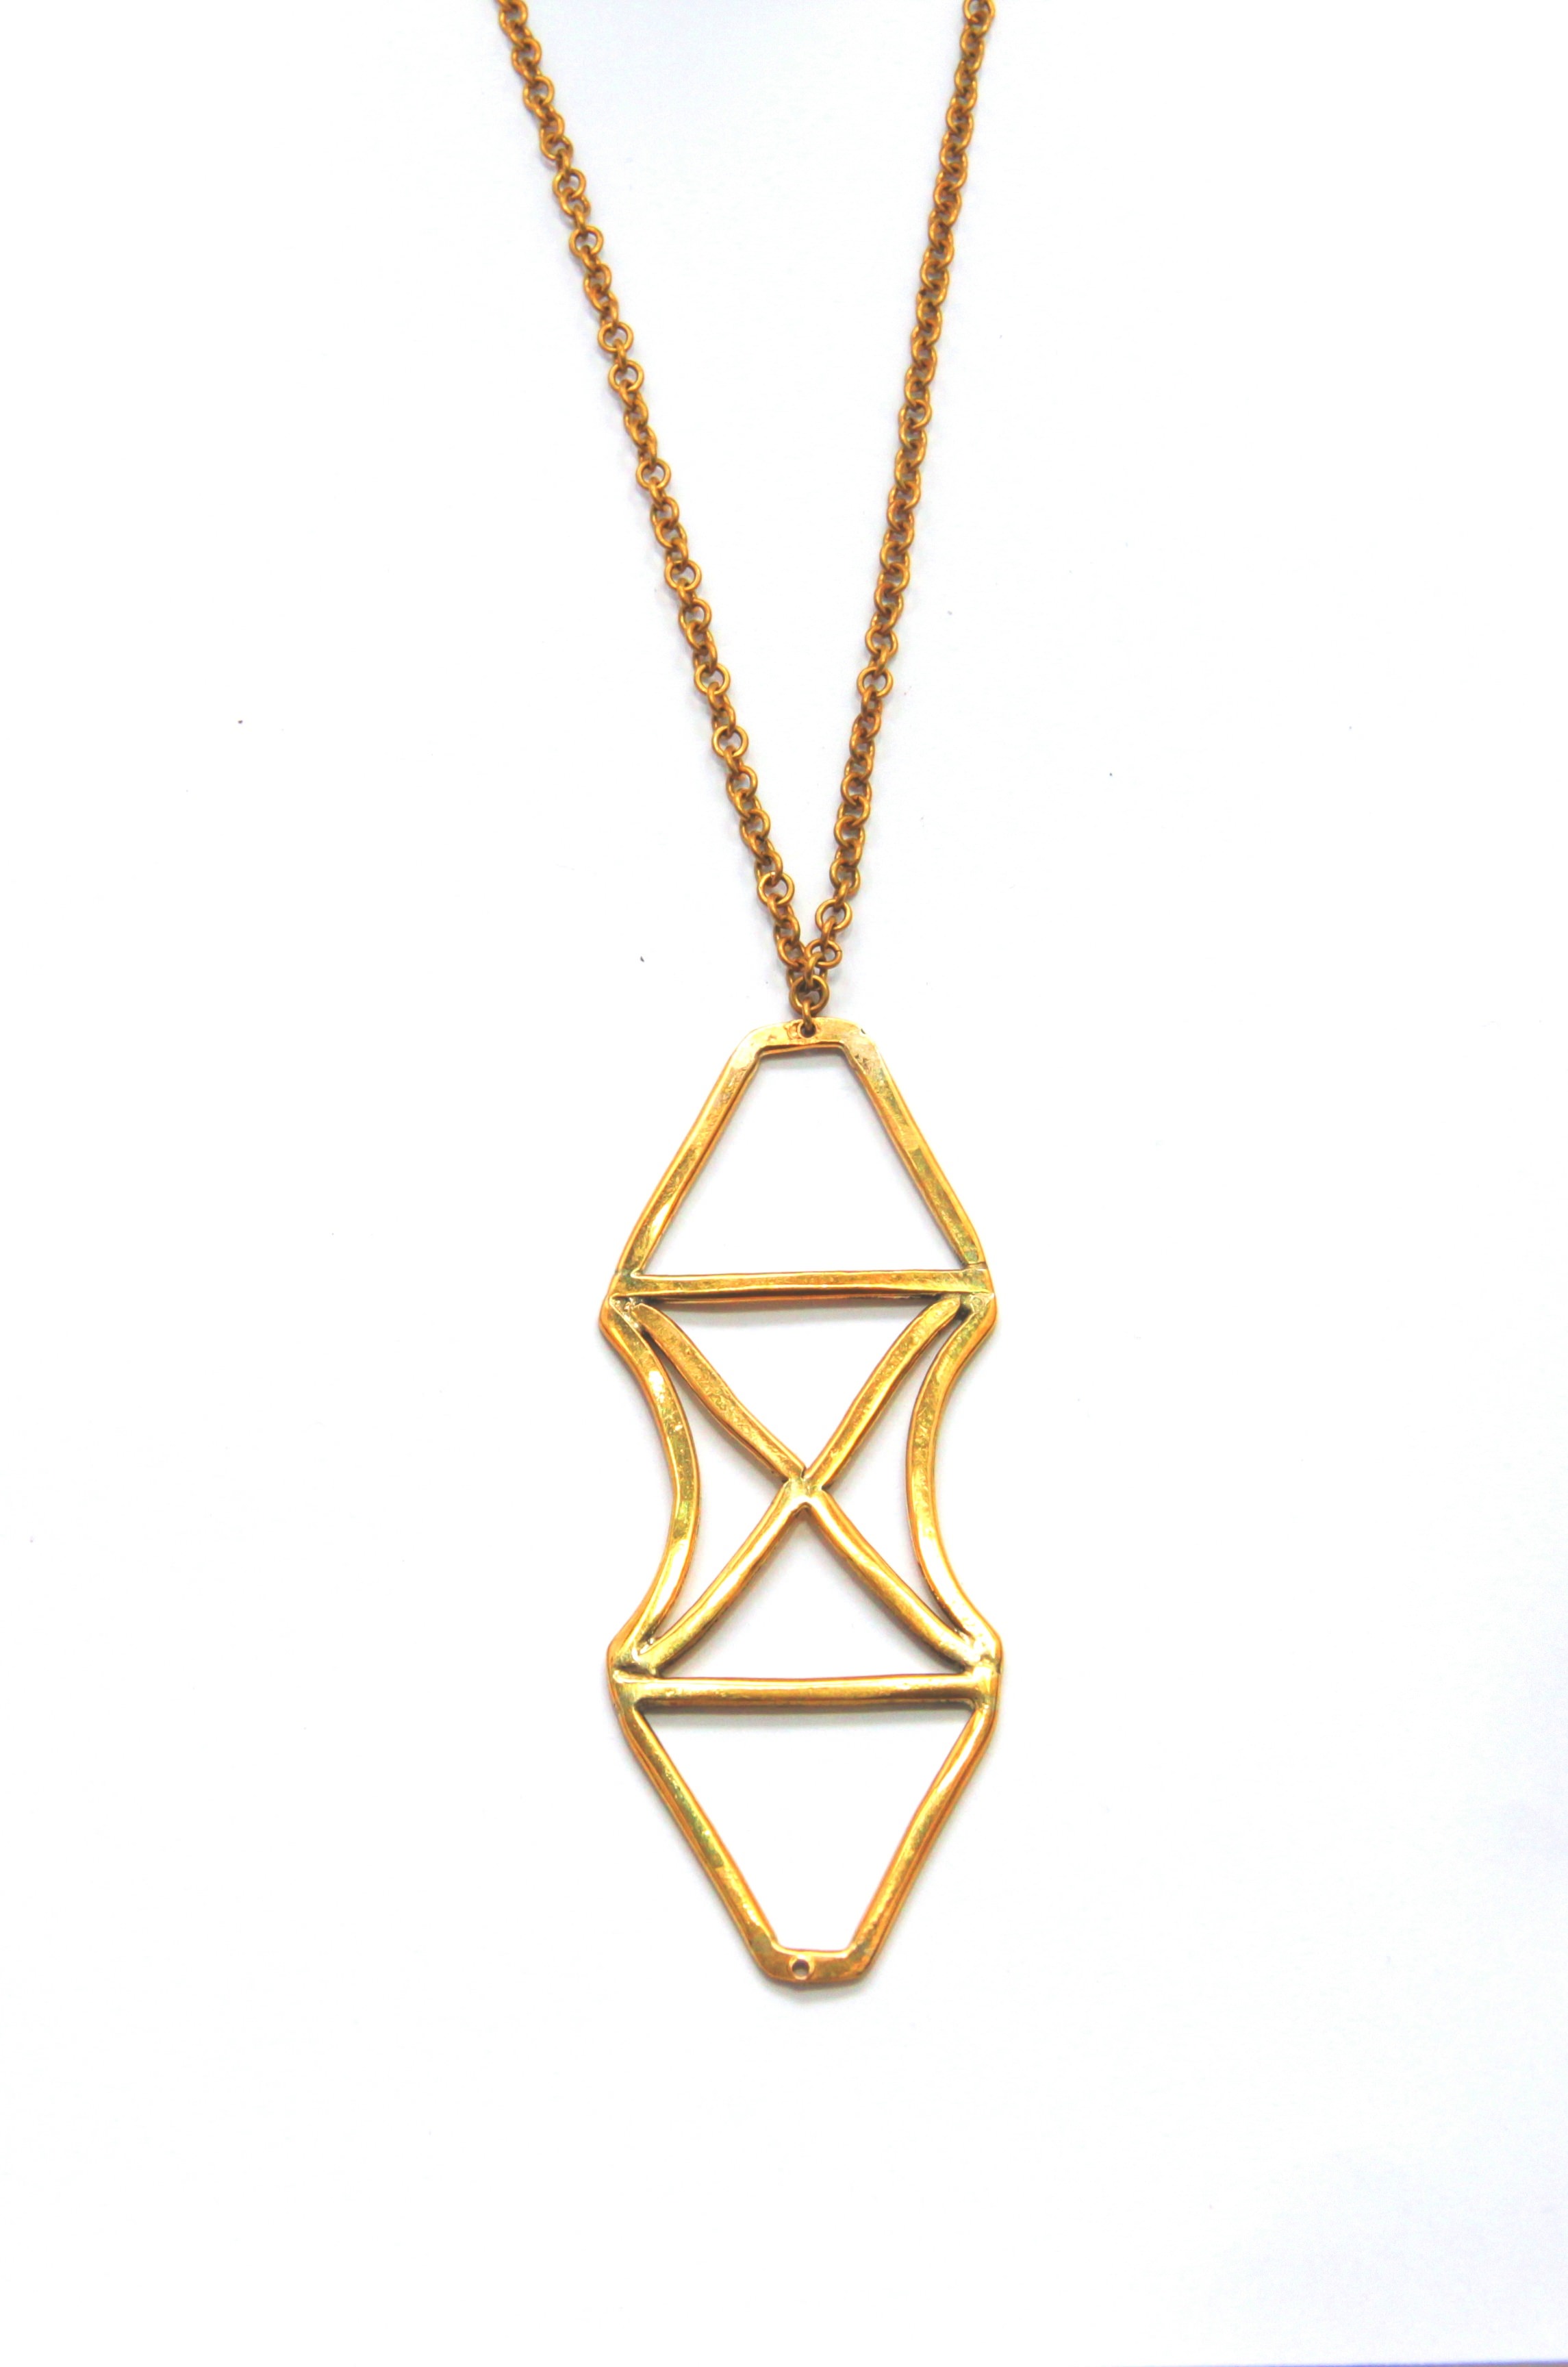 Axis Necklace - CN005.jpg